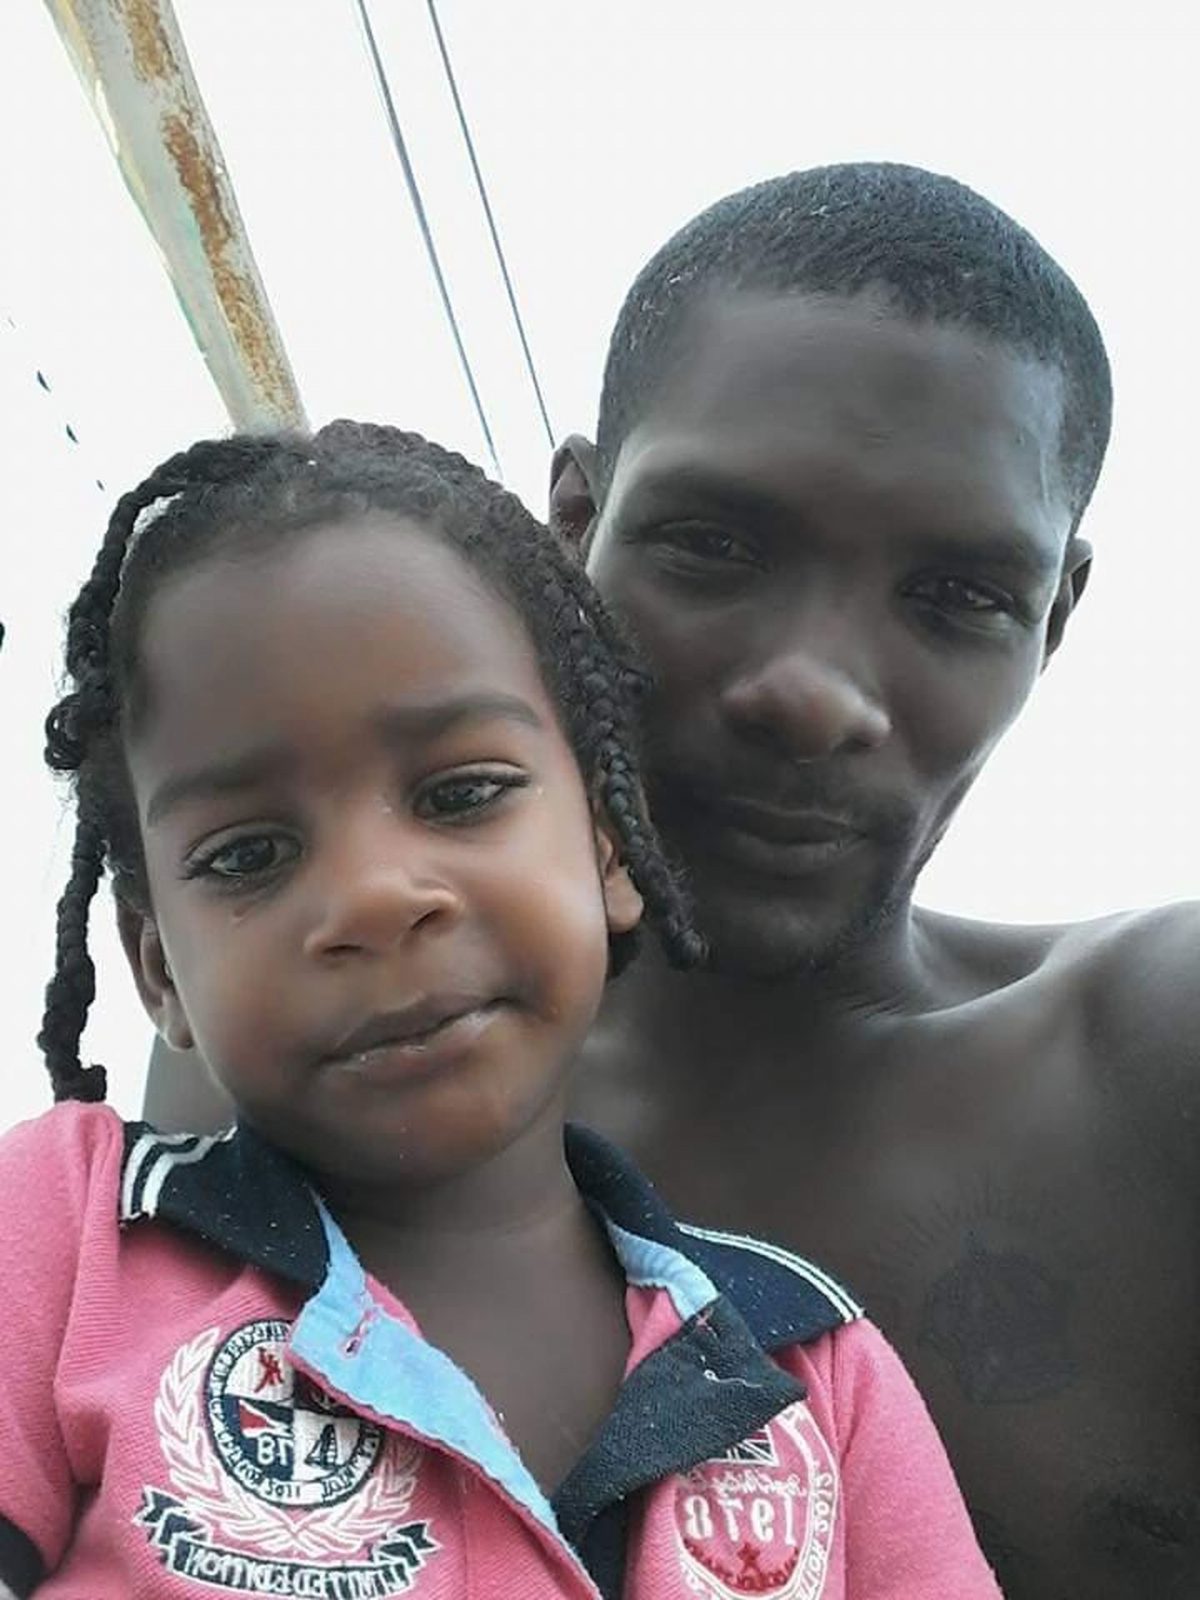 Makeisha Maynard, 8, pictured with her father Michael Maynard